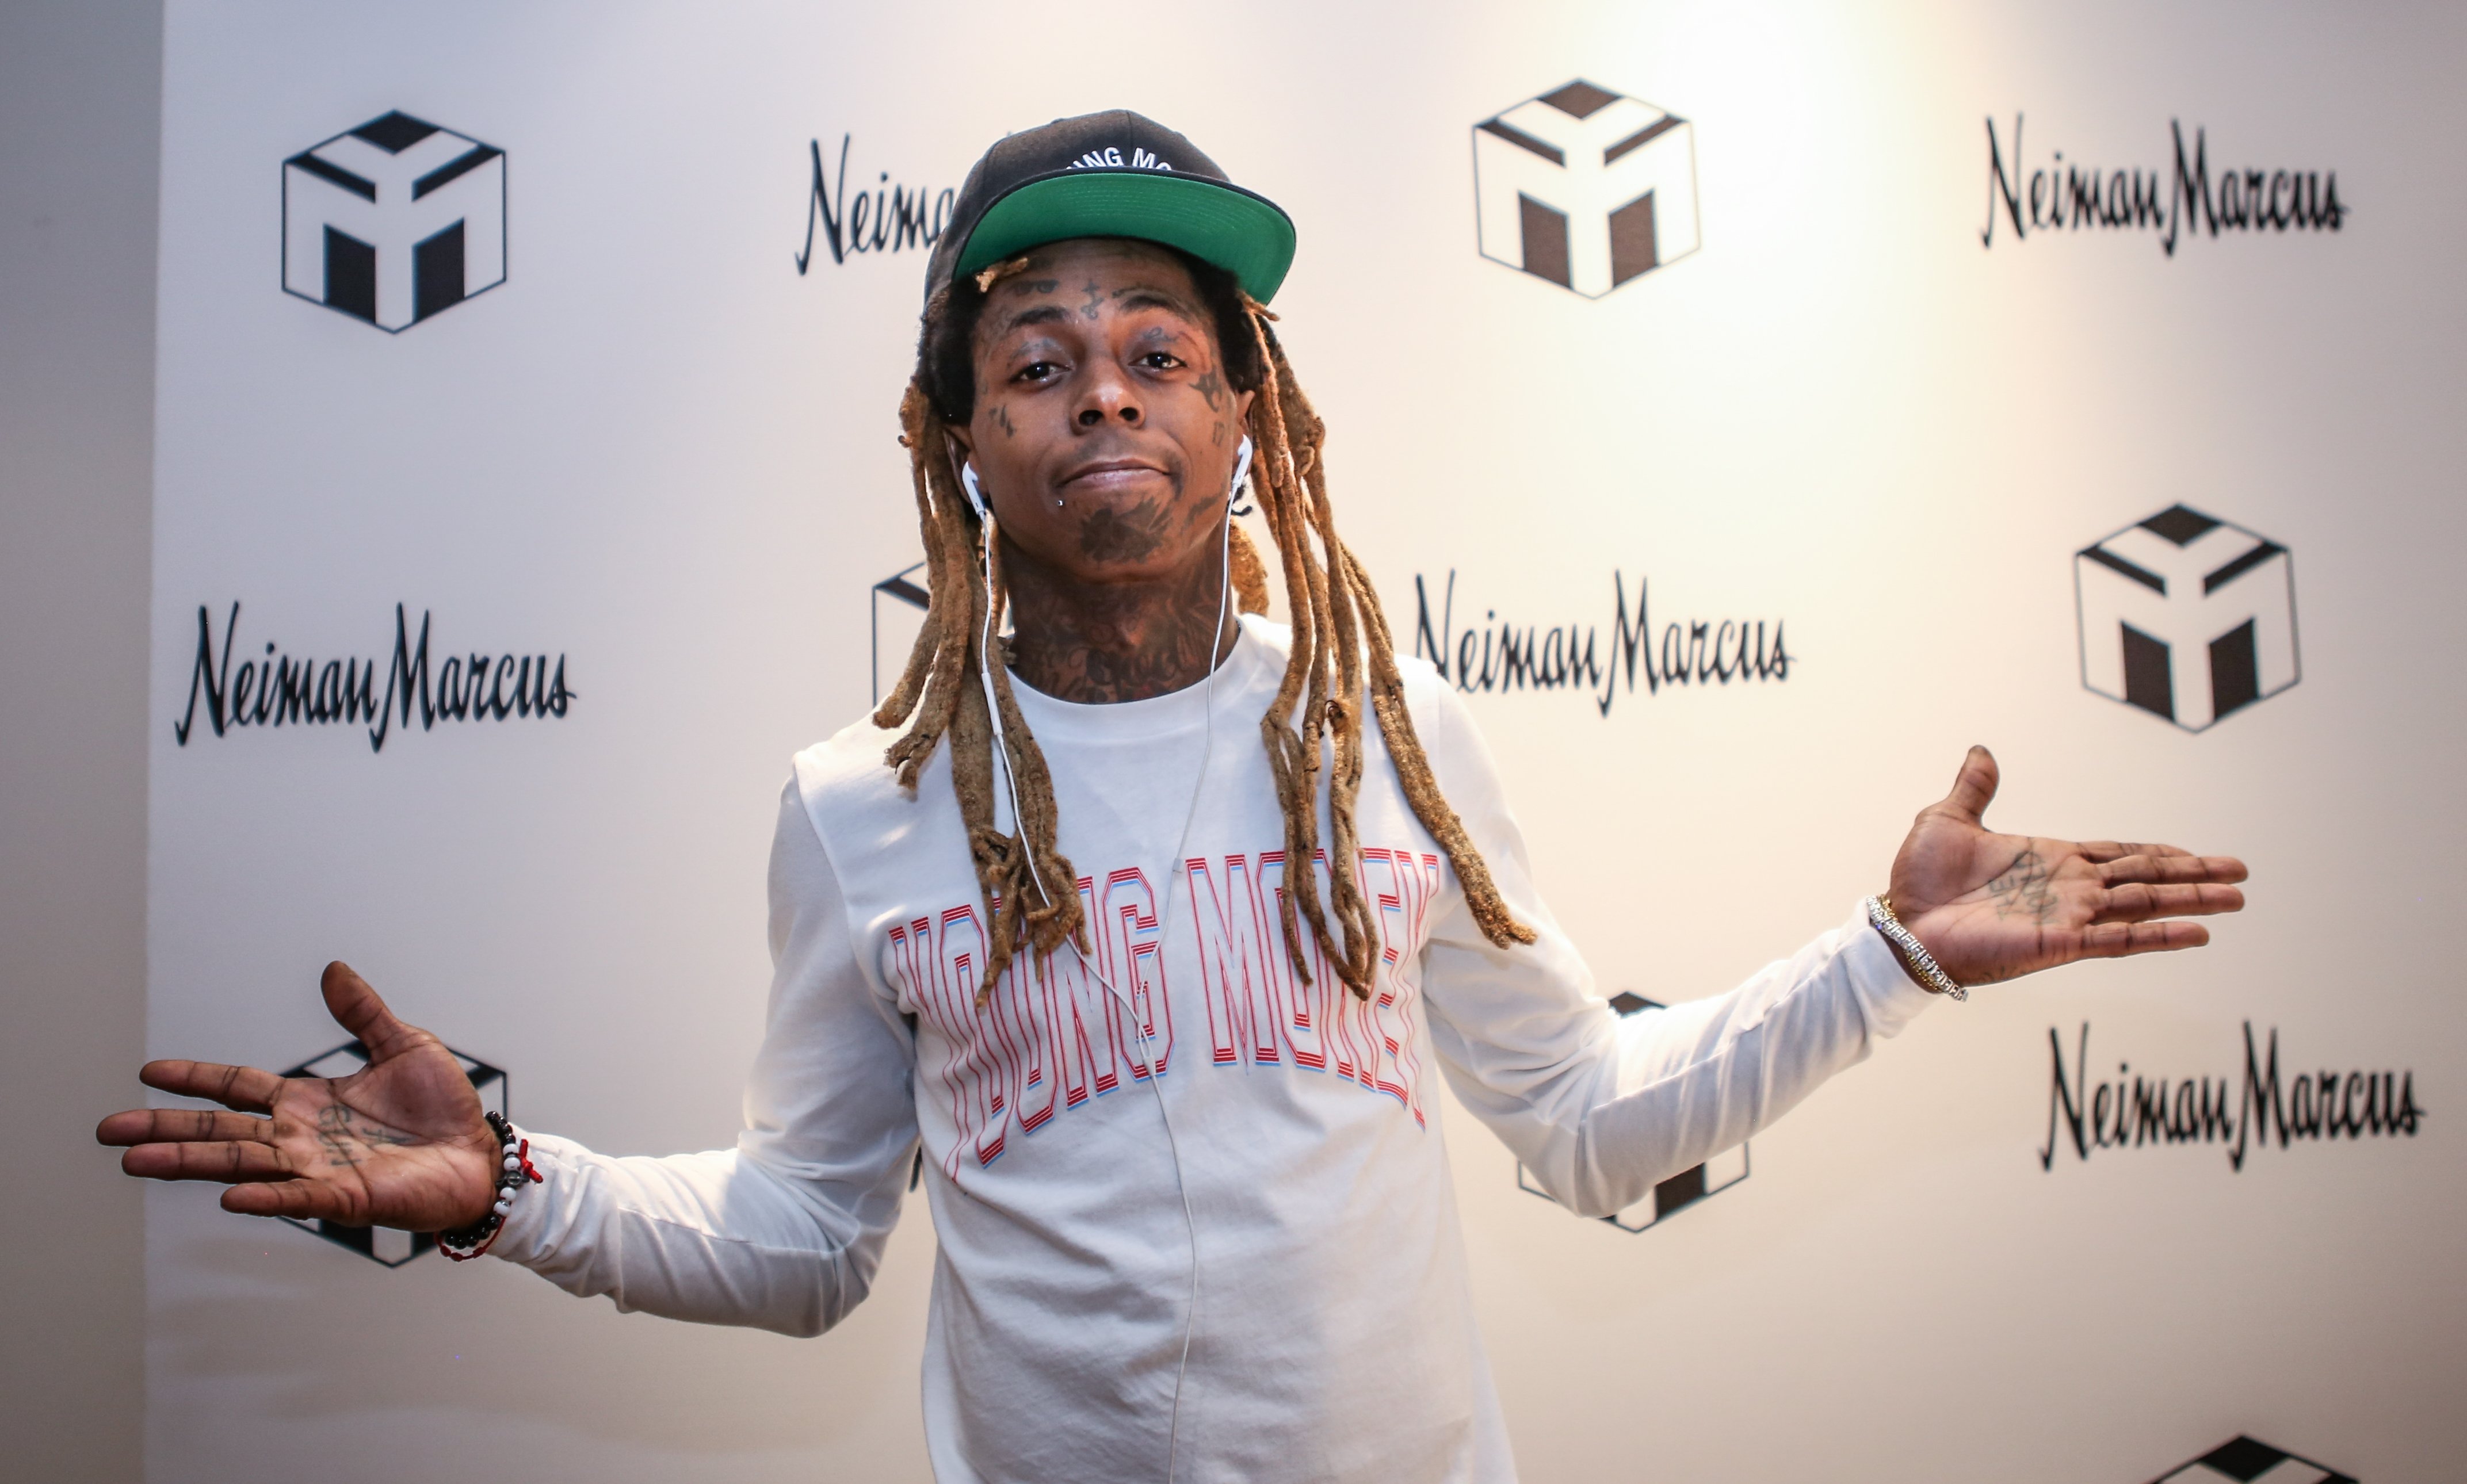 Rapper Lil Wayne, Kameron's father at a Neiman Marcus event in Florida in March 2018. | Photo: Getty Images